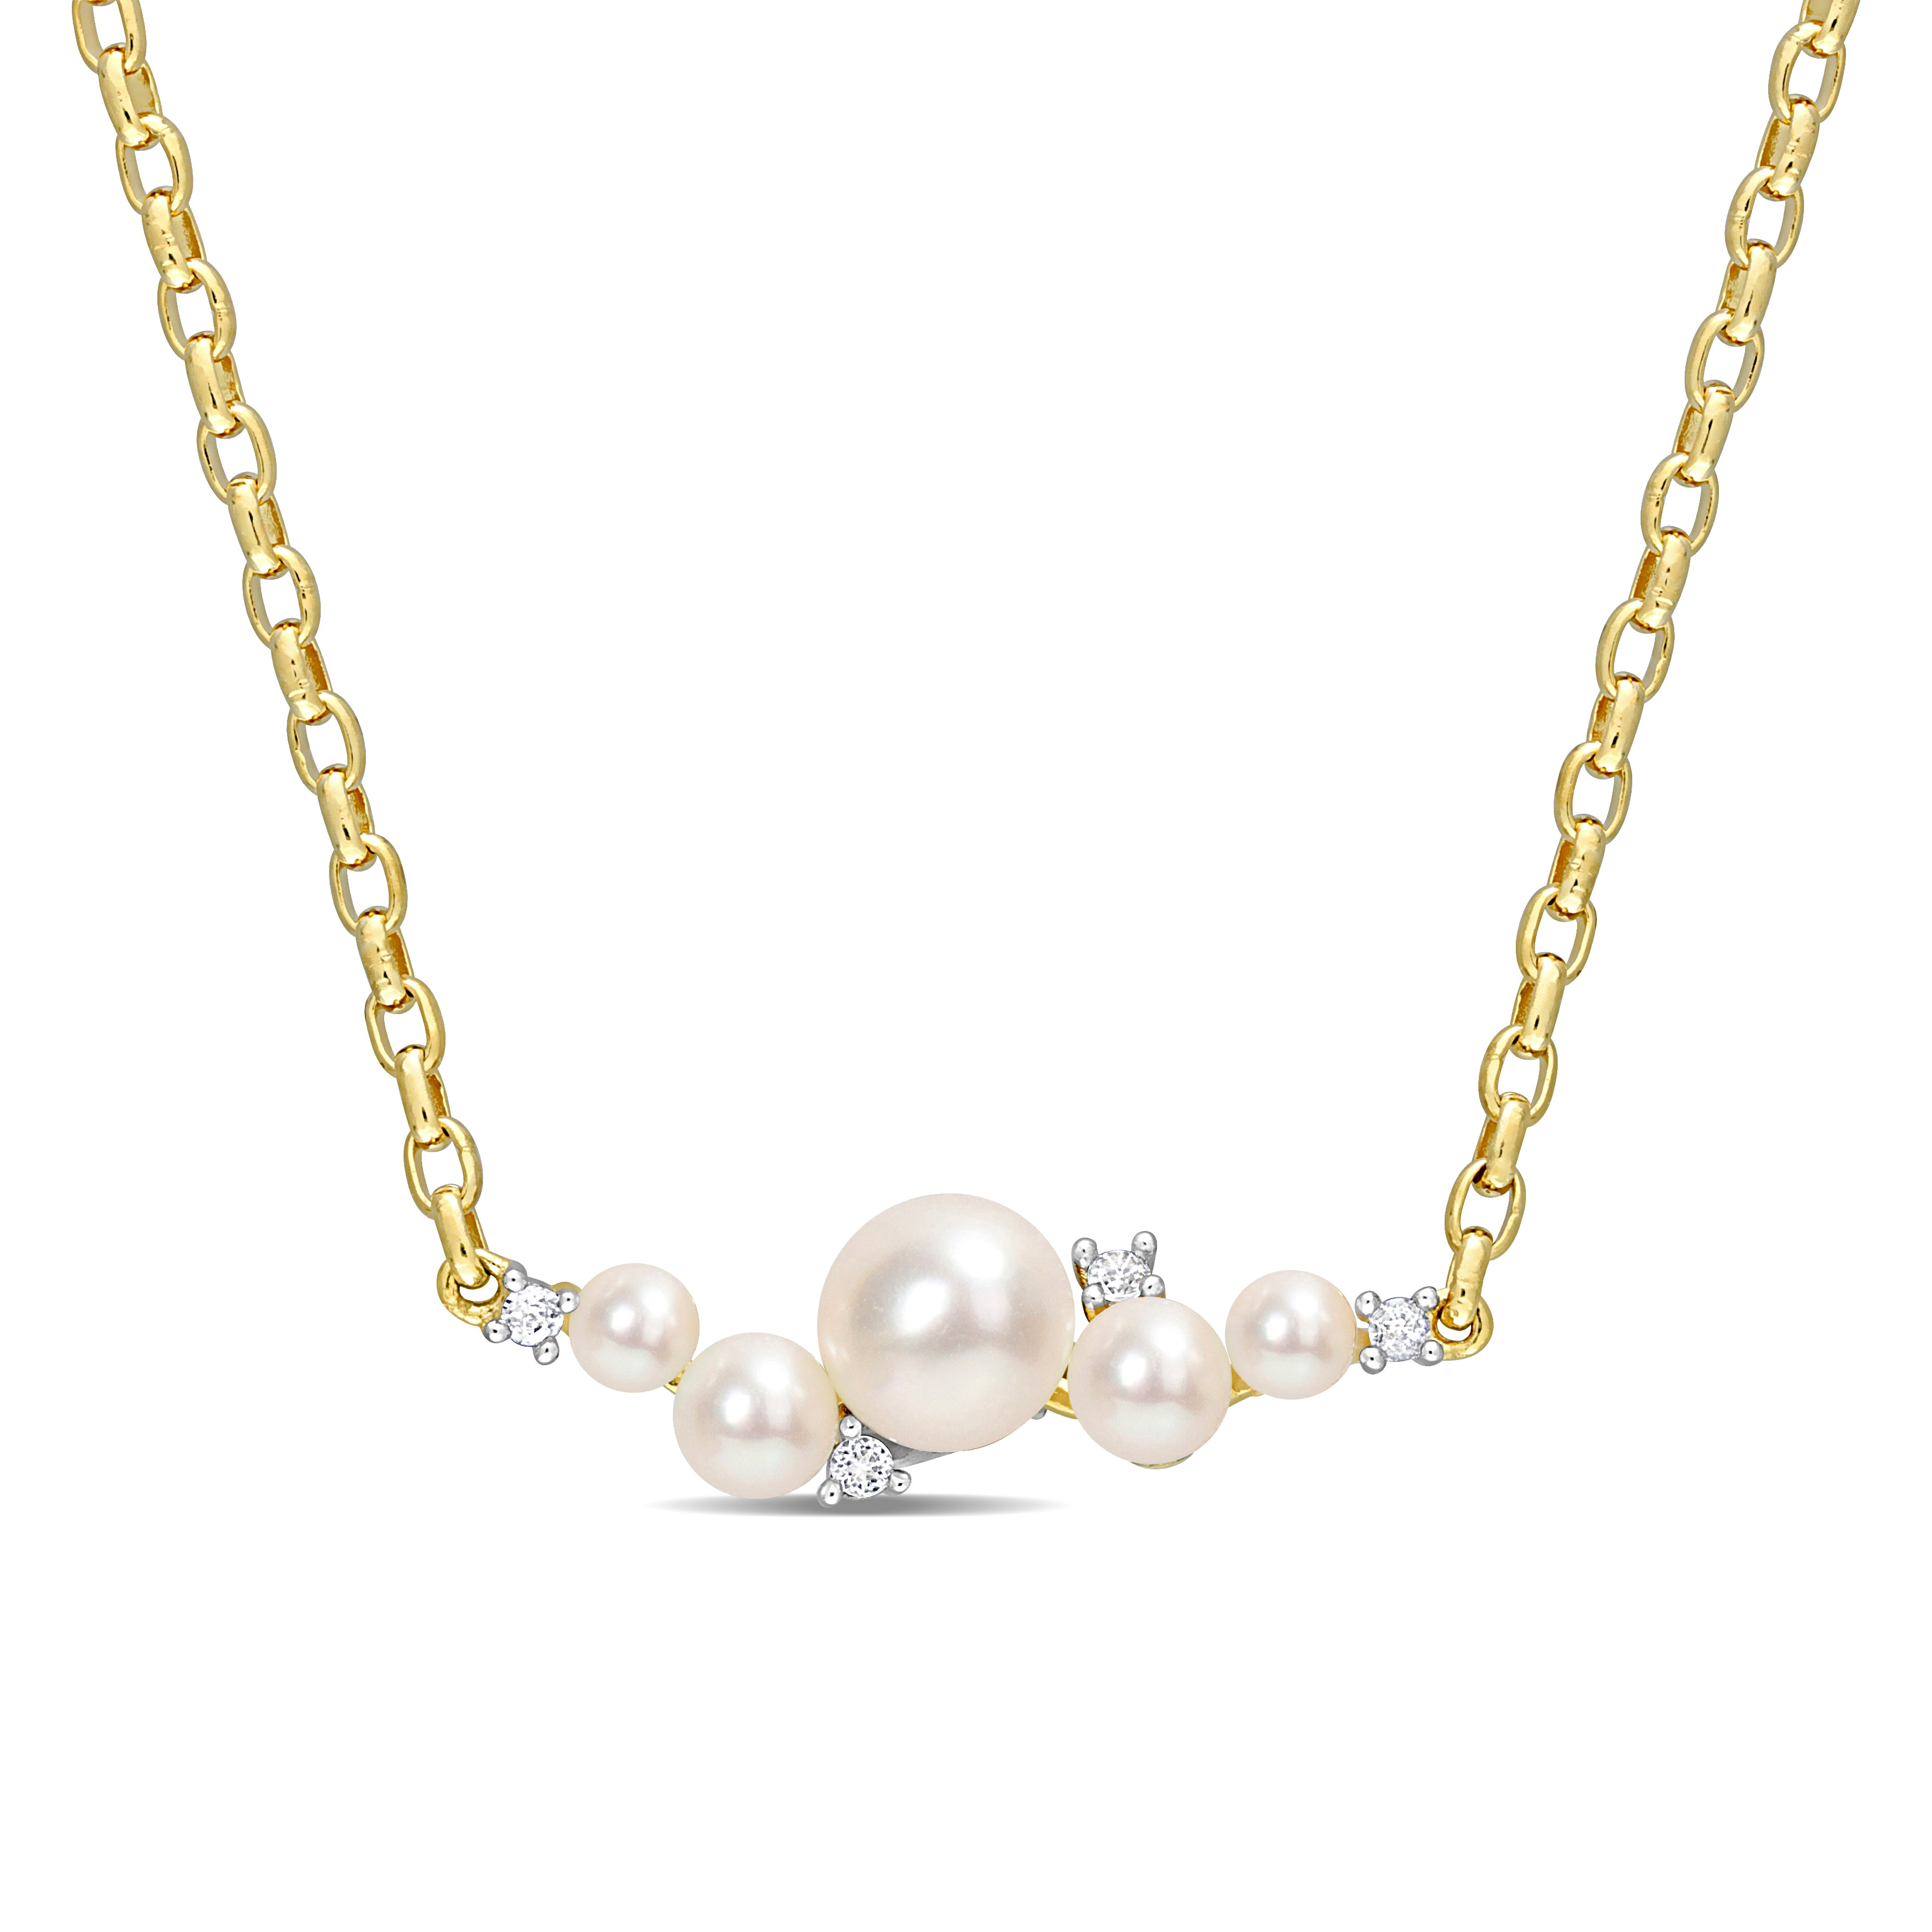 Freshwater Cultured Pearl and 1/8 CT TGW White Topaz Necklace in 18k Yellow Gold Plated Sterling Silver - 18 in